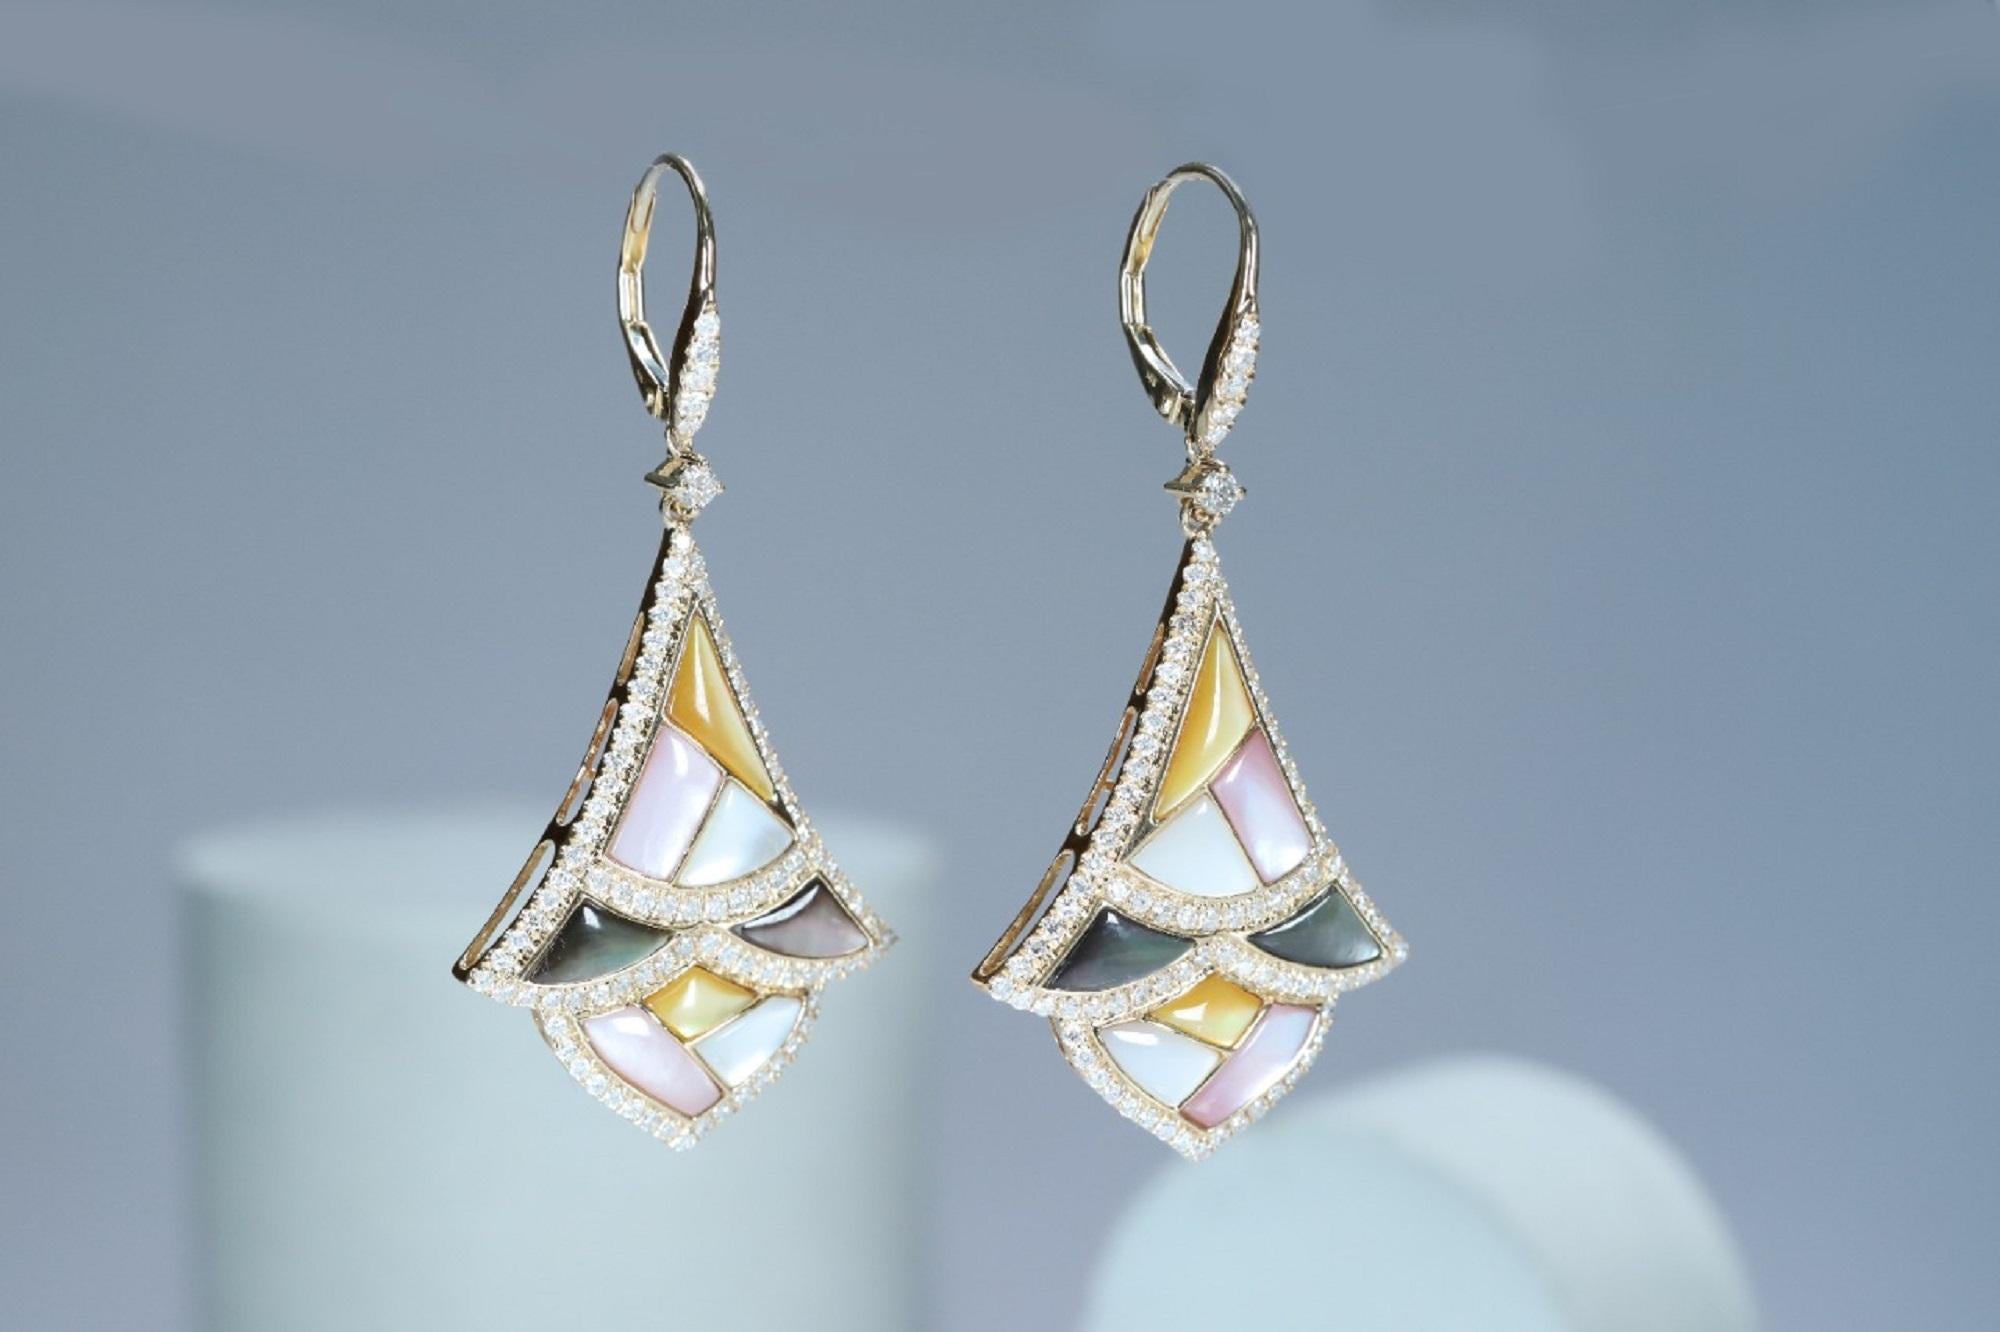 Each of these pretty earrings from Gin & Grace features a Mother Of Pearl gemstone on a lever back clasp adorned with white diamonds. These earrings are made of rich 14-karat Yellow gold with a high polish. Style: Dangle Total gemstone weight: 5.50